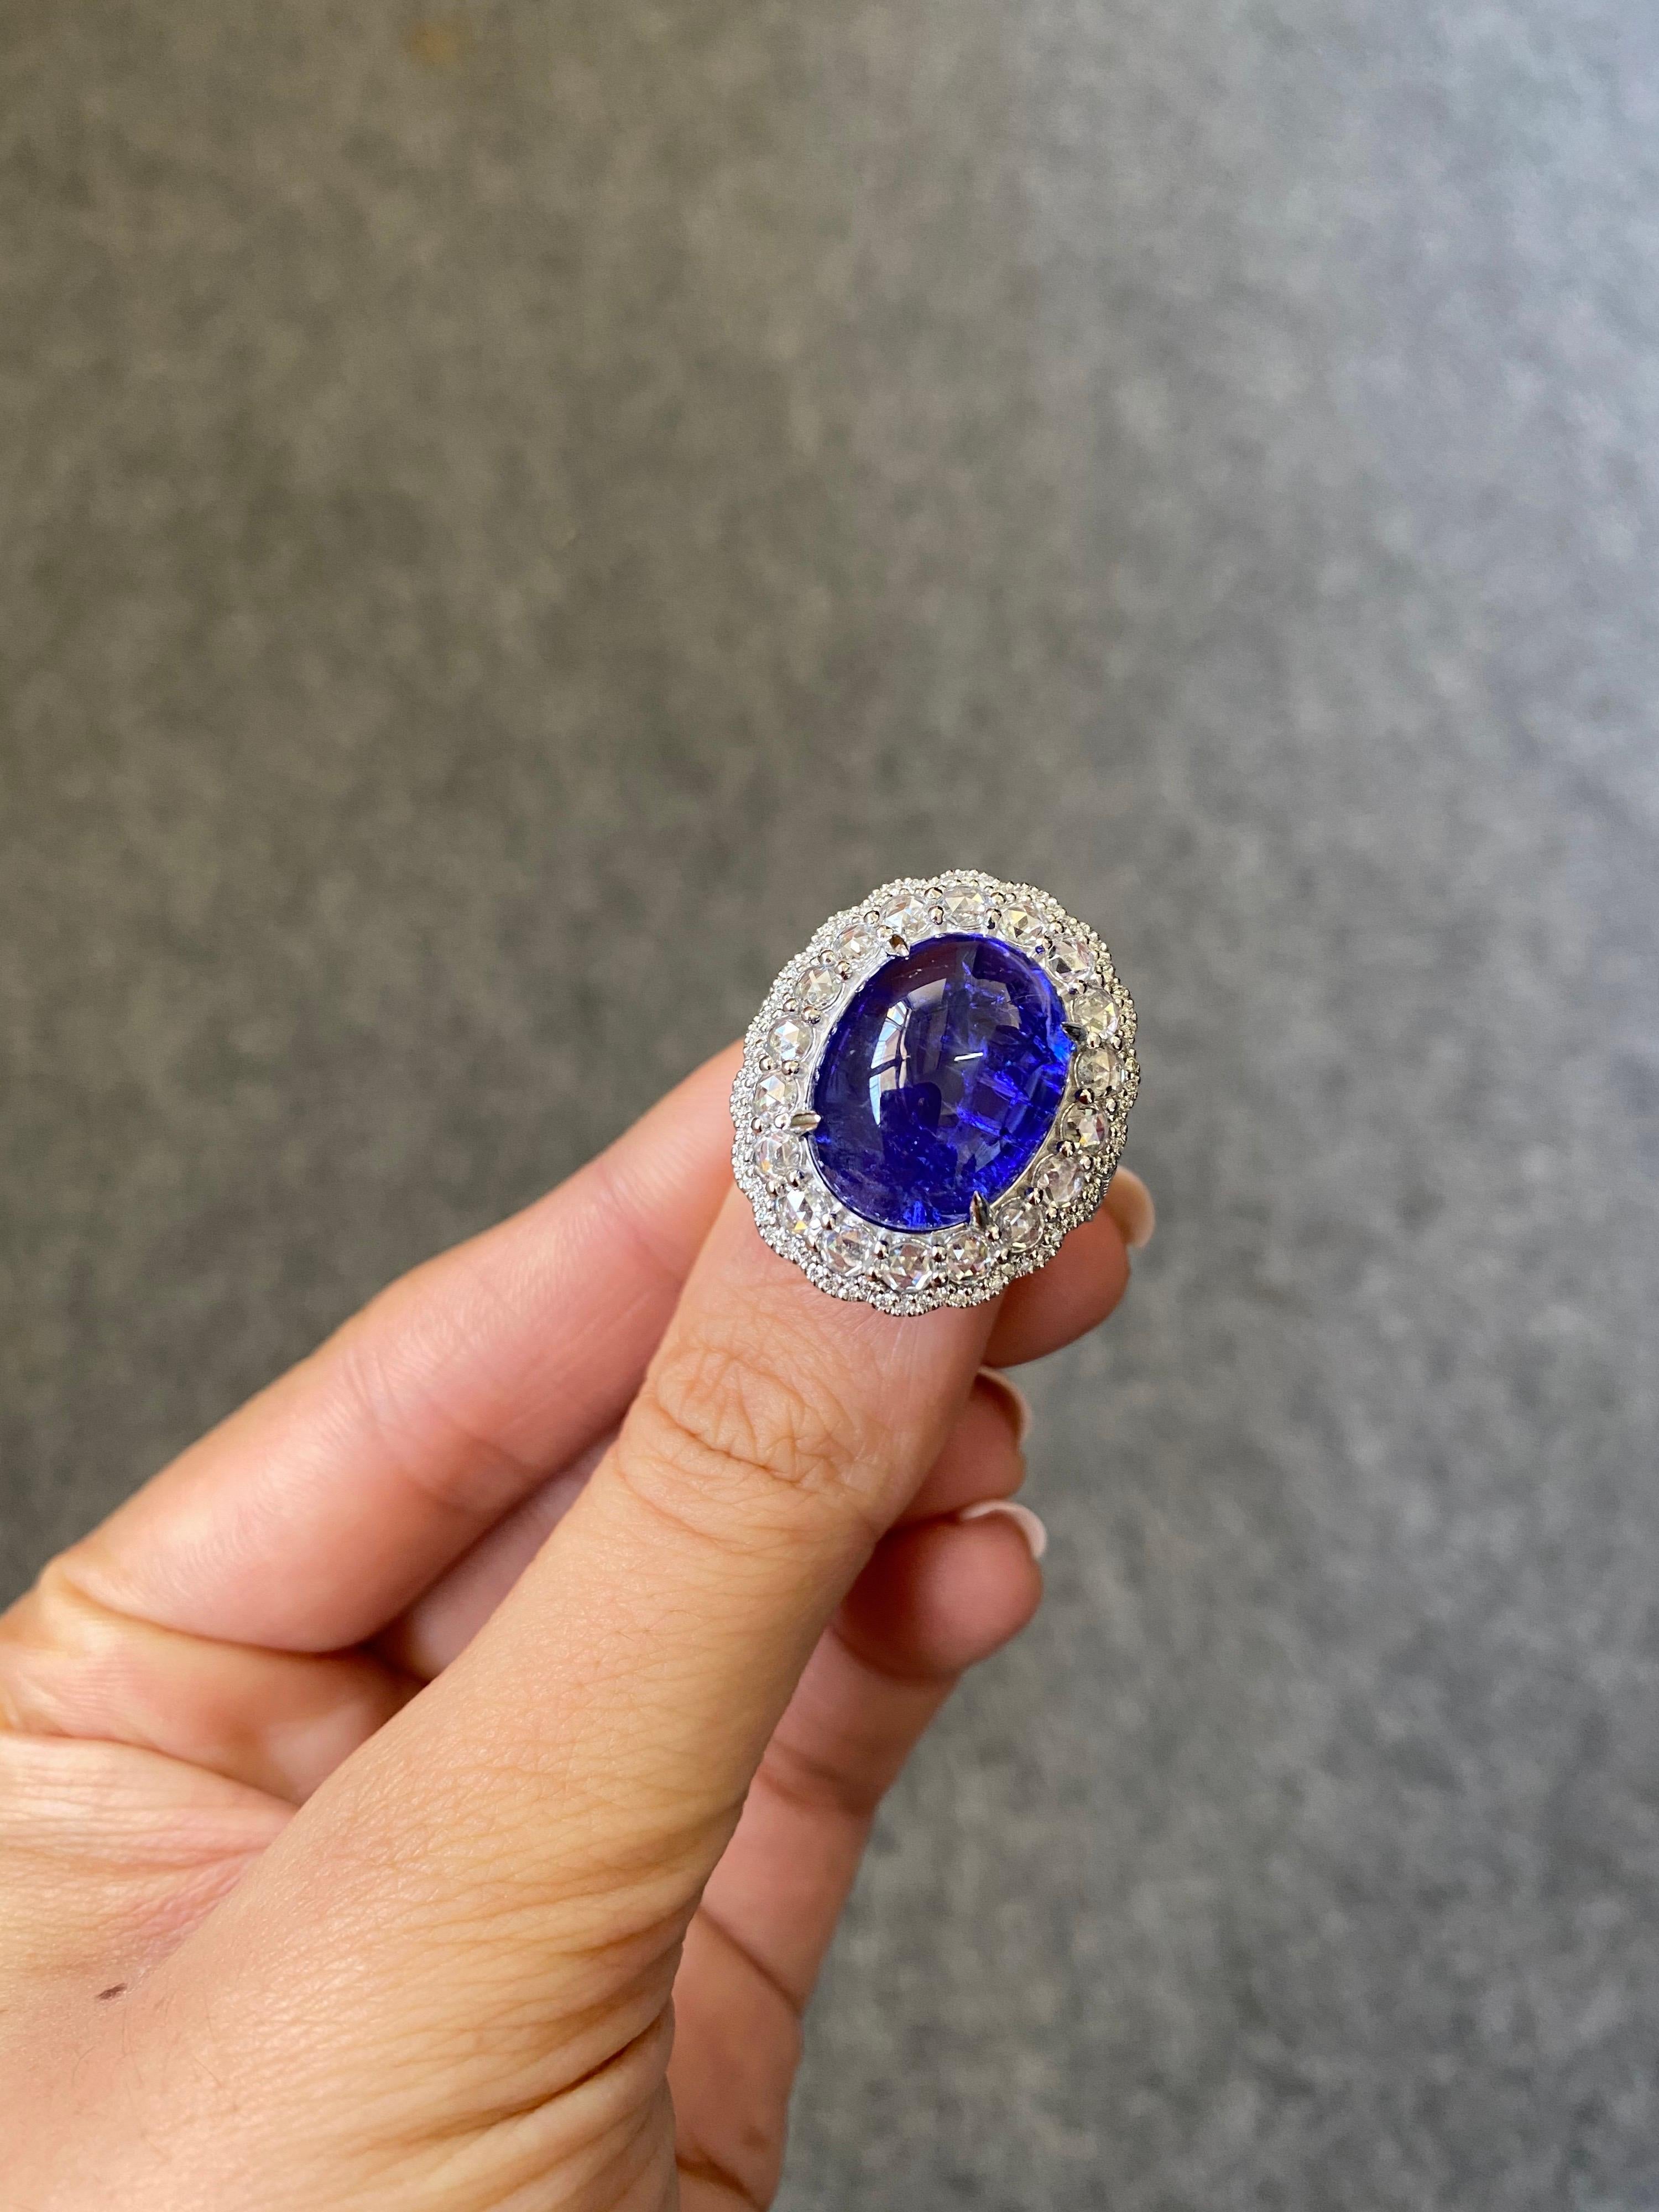 A stunning 14.34 carat Tanzanite and Diamond cocktail ring, set in solid 18K White Gold. The Tanzanite is transparent, with an attractive blue-ish hue and great luster. Both, brilliant cut and rose cut White Diamonds are used to enhance the beauty